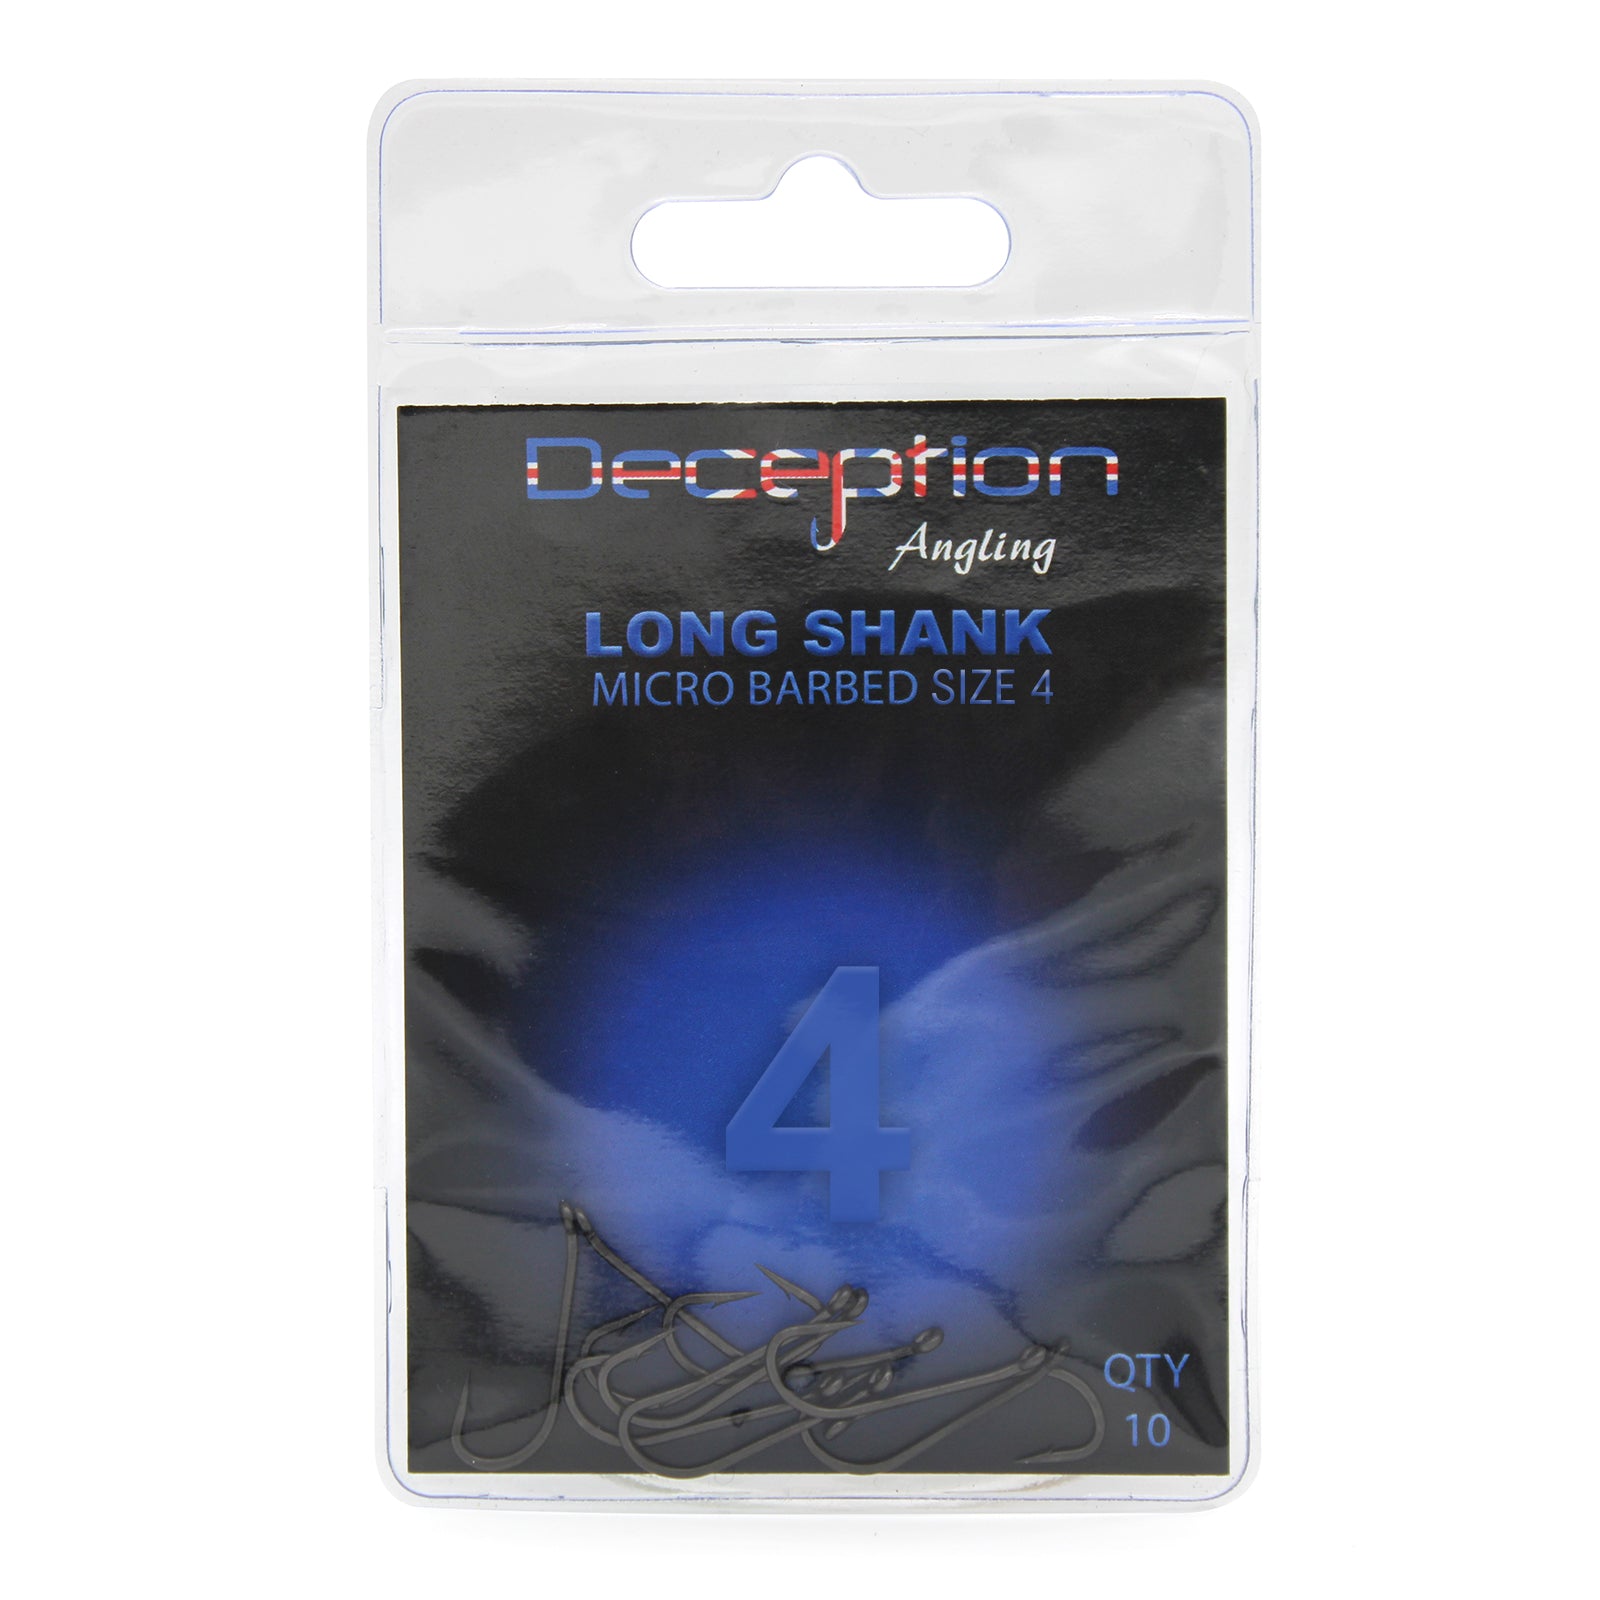 Deception Angling Long Shank Micro Barbed Fishing Hooks Pack of 10 - Size 4